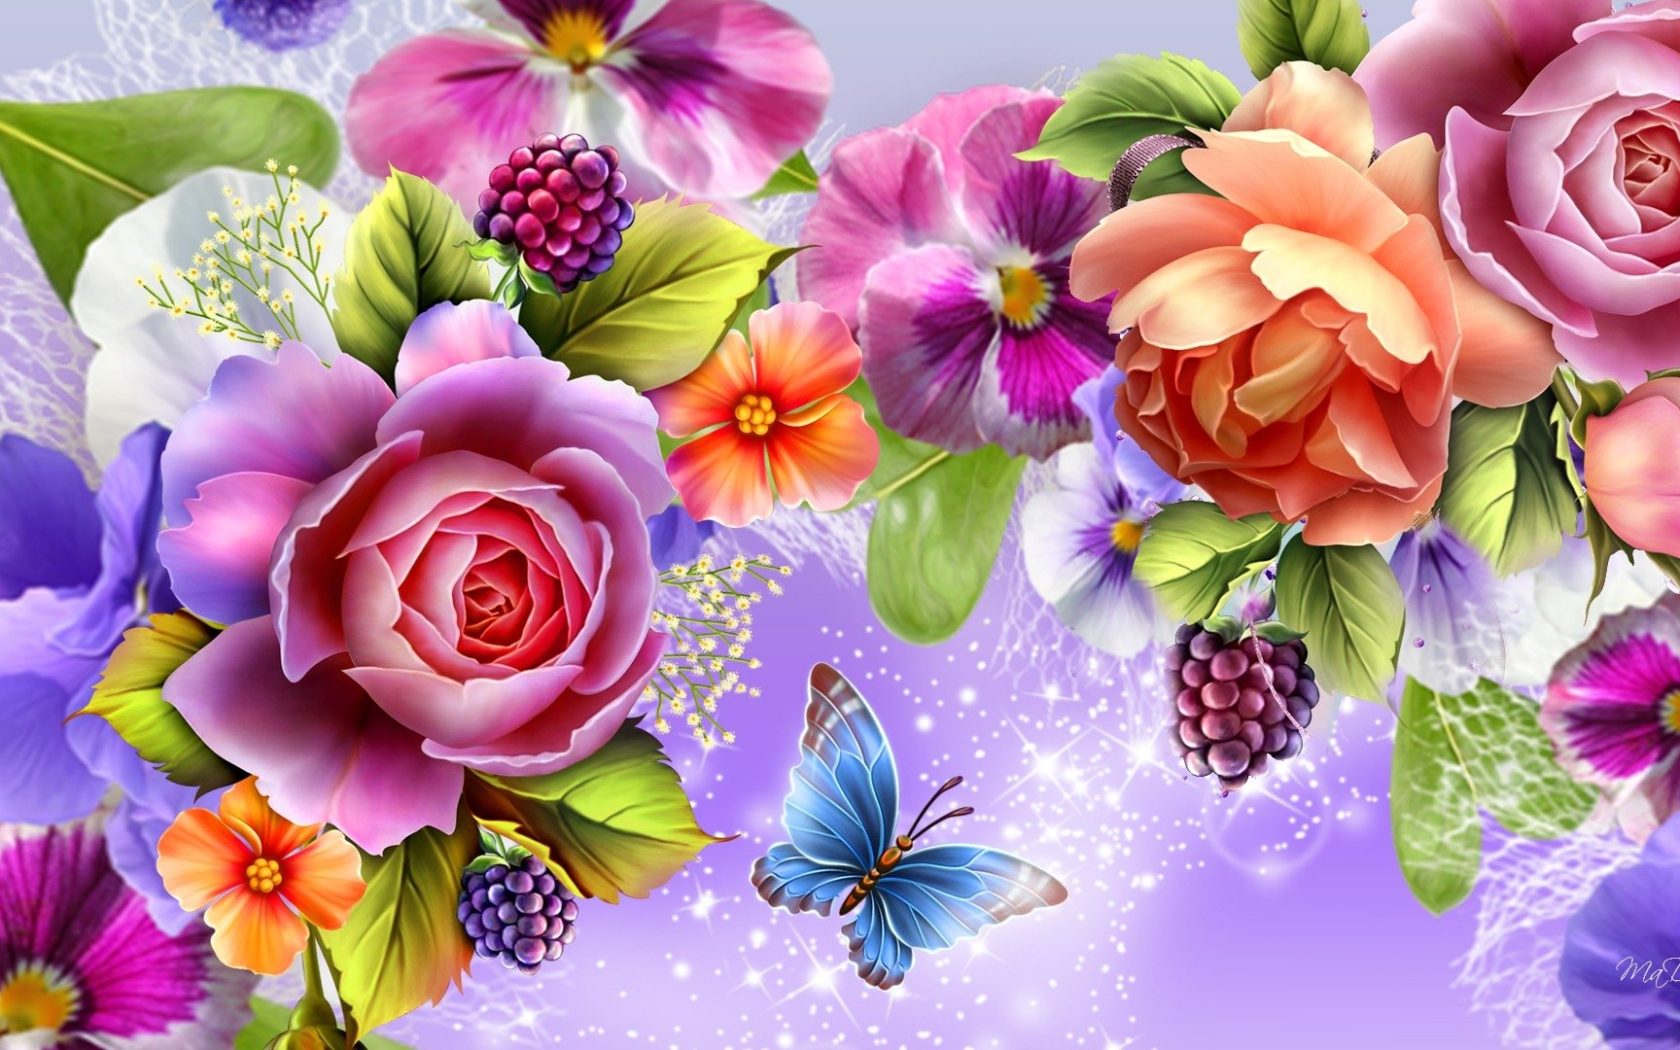 Colorful Flowers And Butterfly Vector Abstract Art Image, Wallpaper13.com